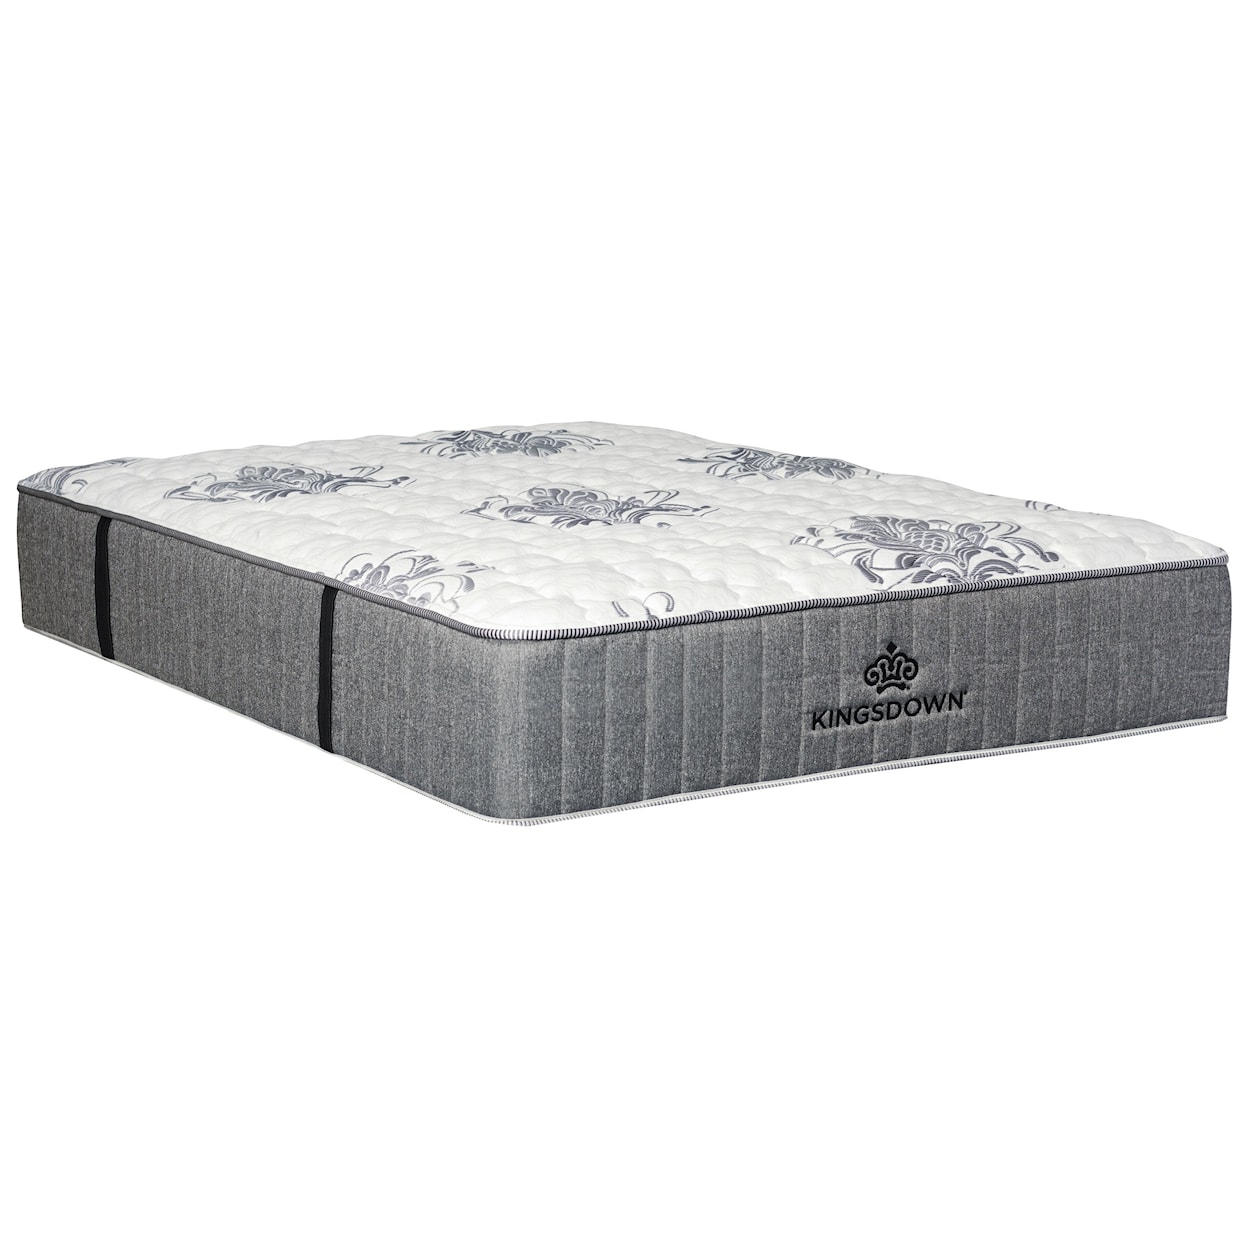 Kingsdown Passions Zest Extra Firm Full 14" Extra Firm Mattress